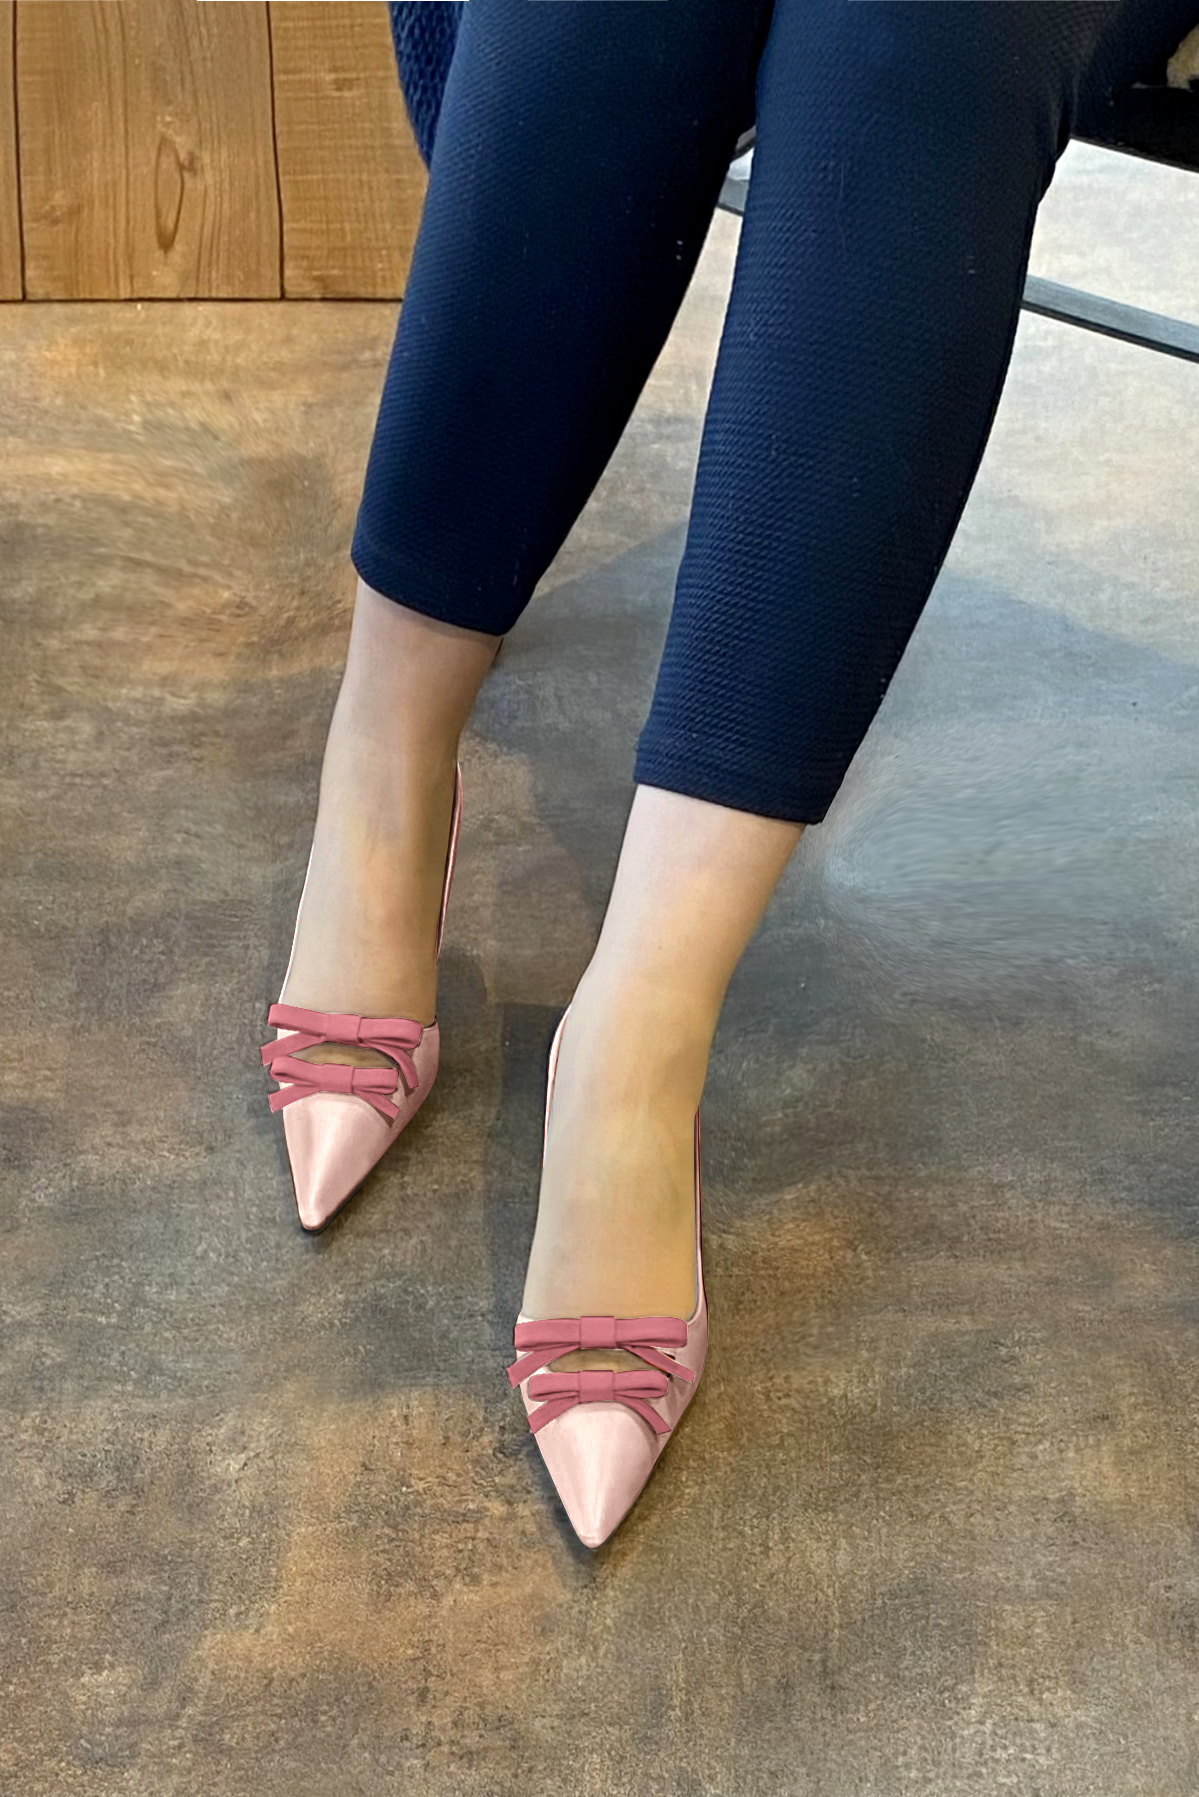 Powder pink women's open back shoes, with a knot. Pointed toe. High slim heel. Worn view - Florence KOOIJMAN